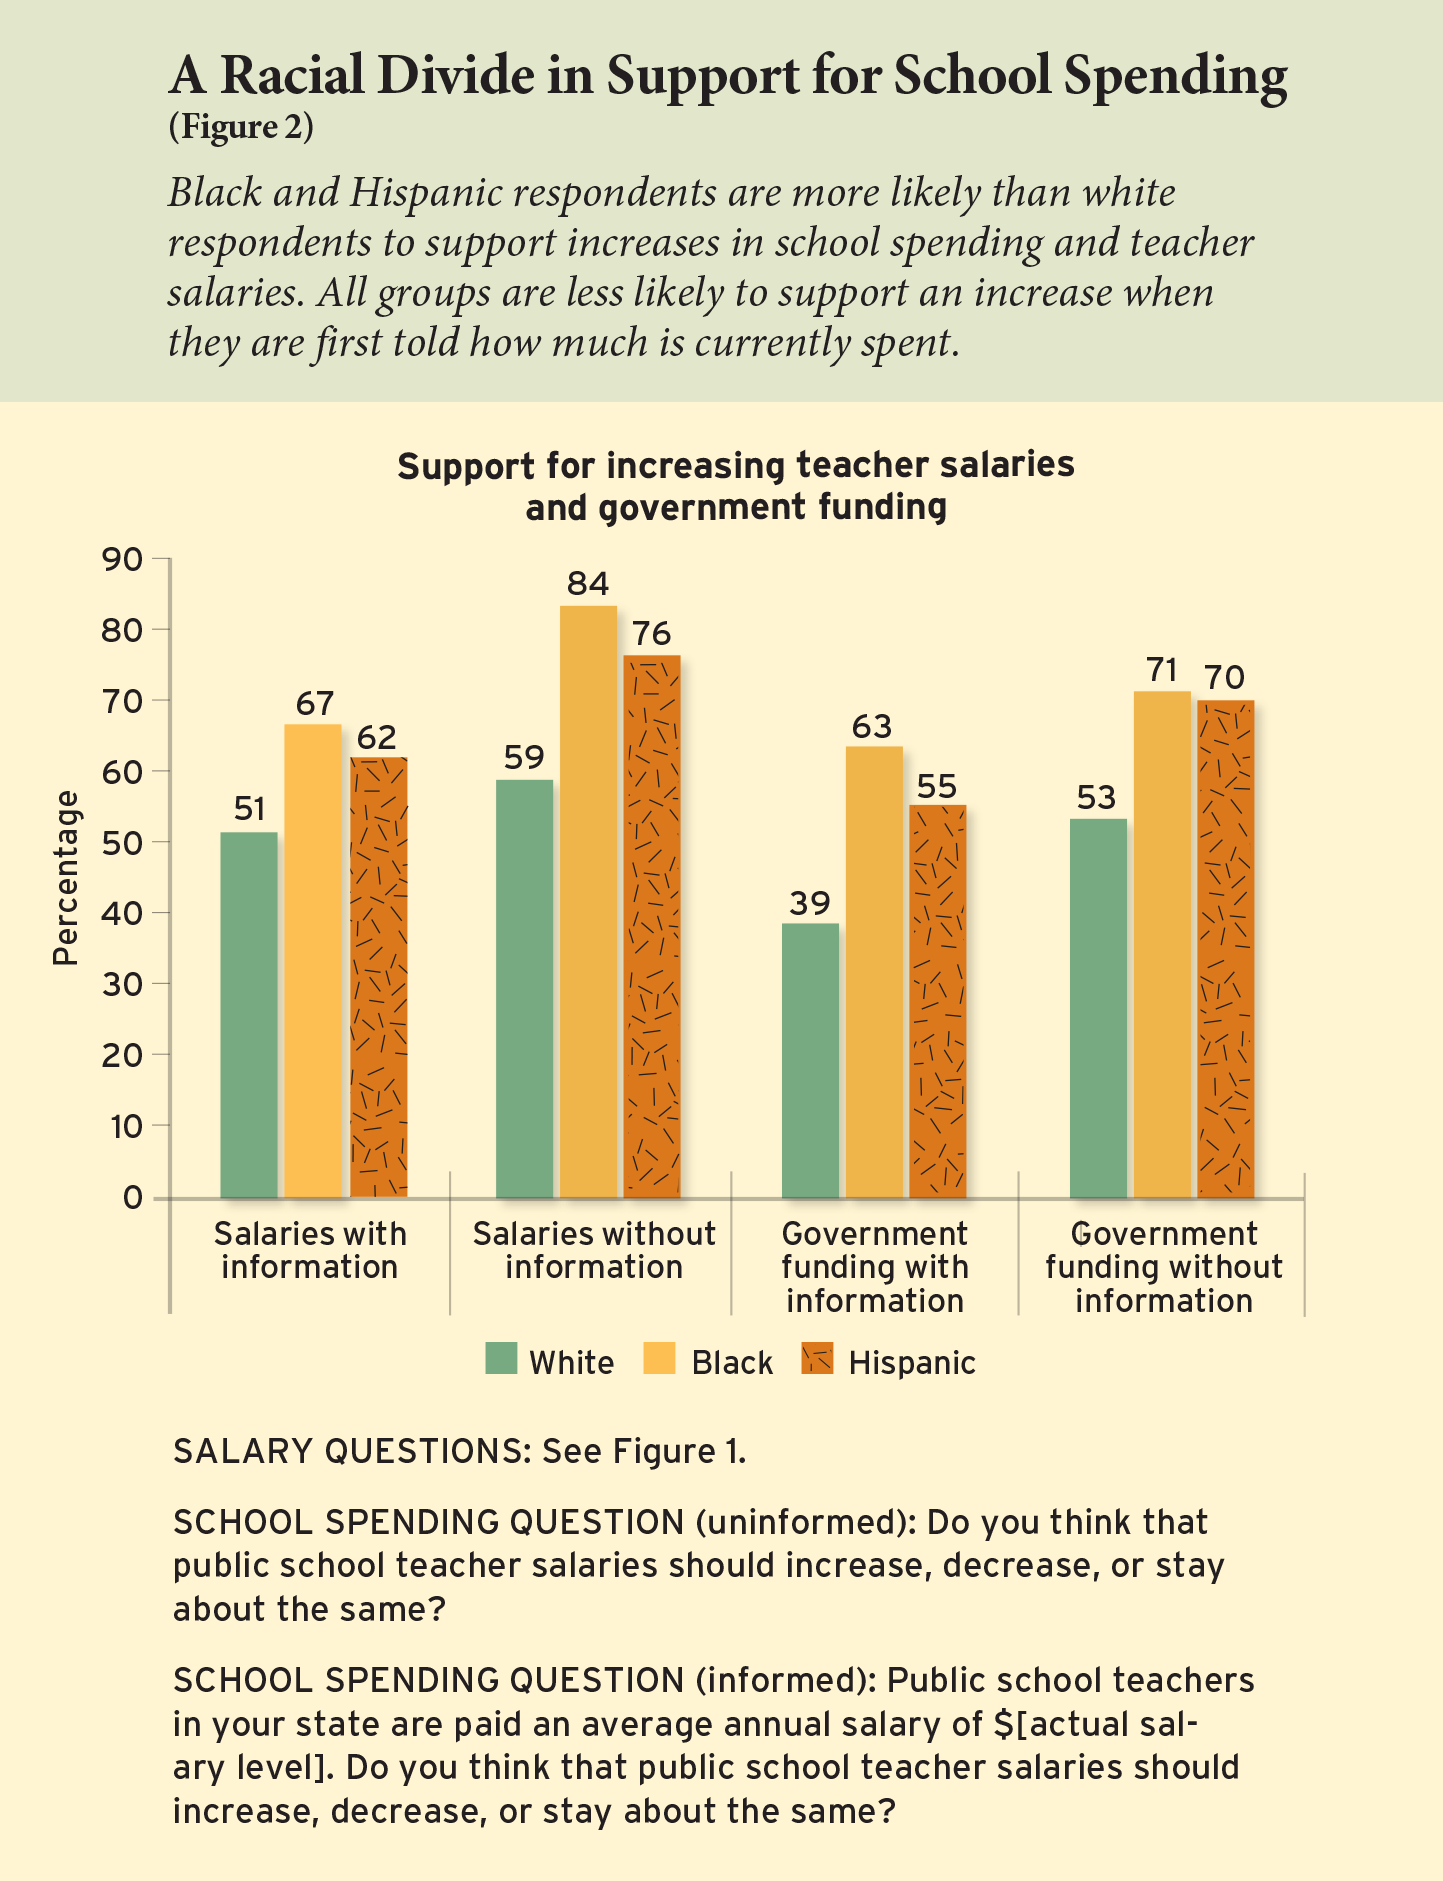 Figure 2: A Racial Divide in Support for School Spending